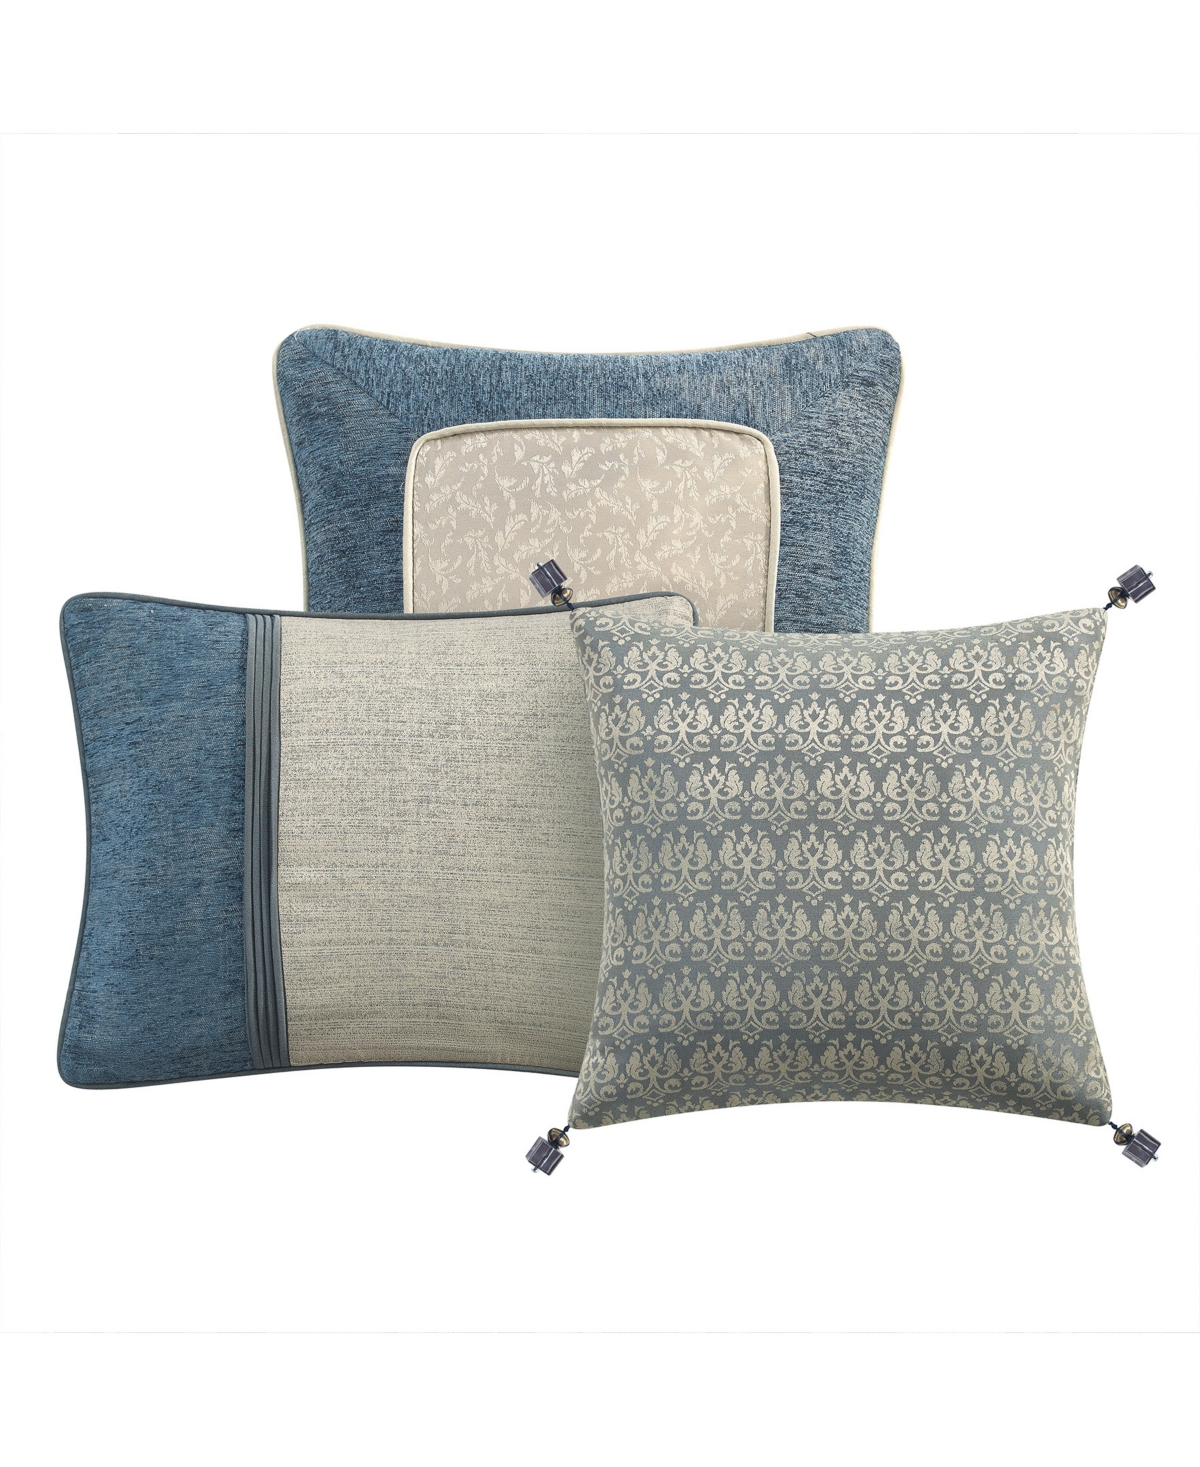 Waterford Laurent Set Of 3 Decorative Pillows In Navy